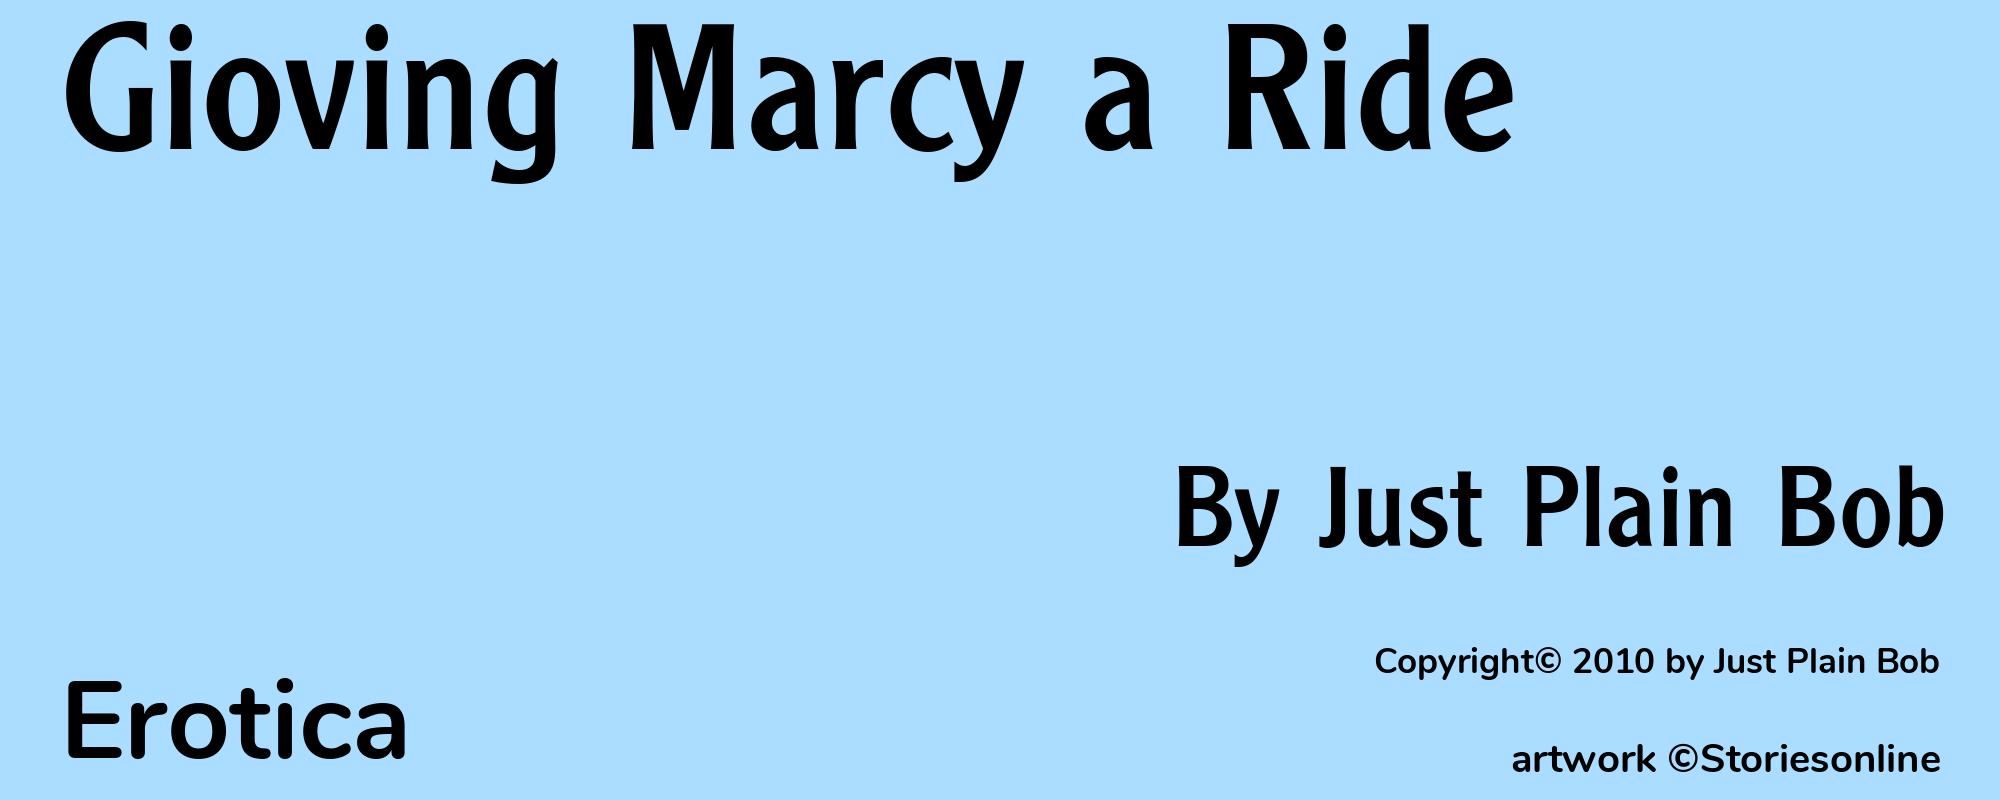 Gioving Marcy a Ride - Cover